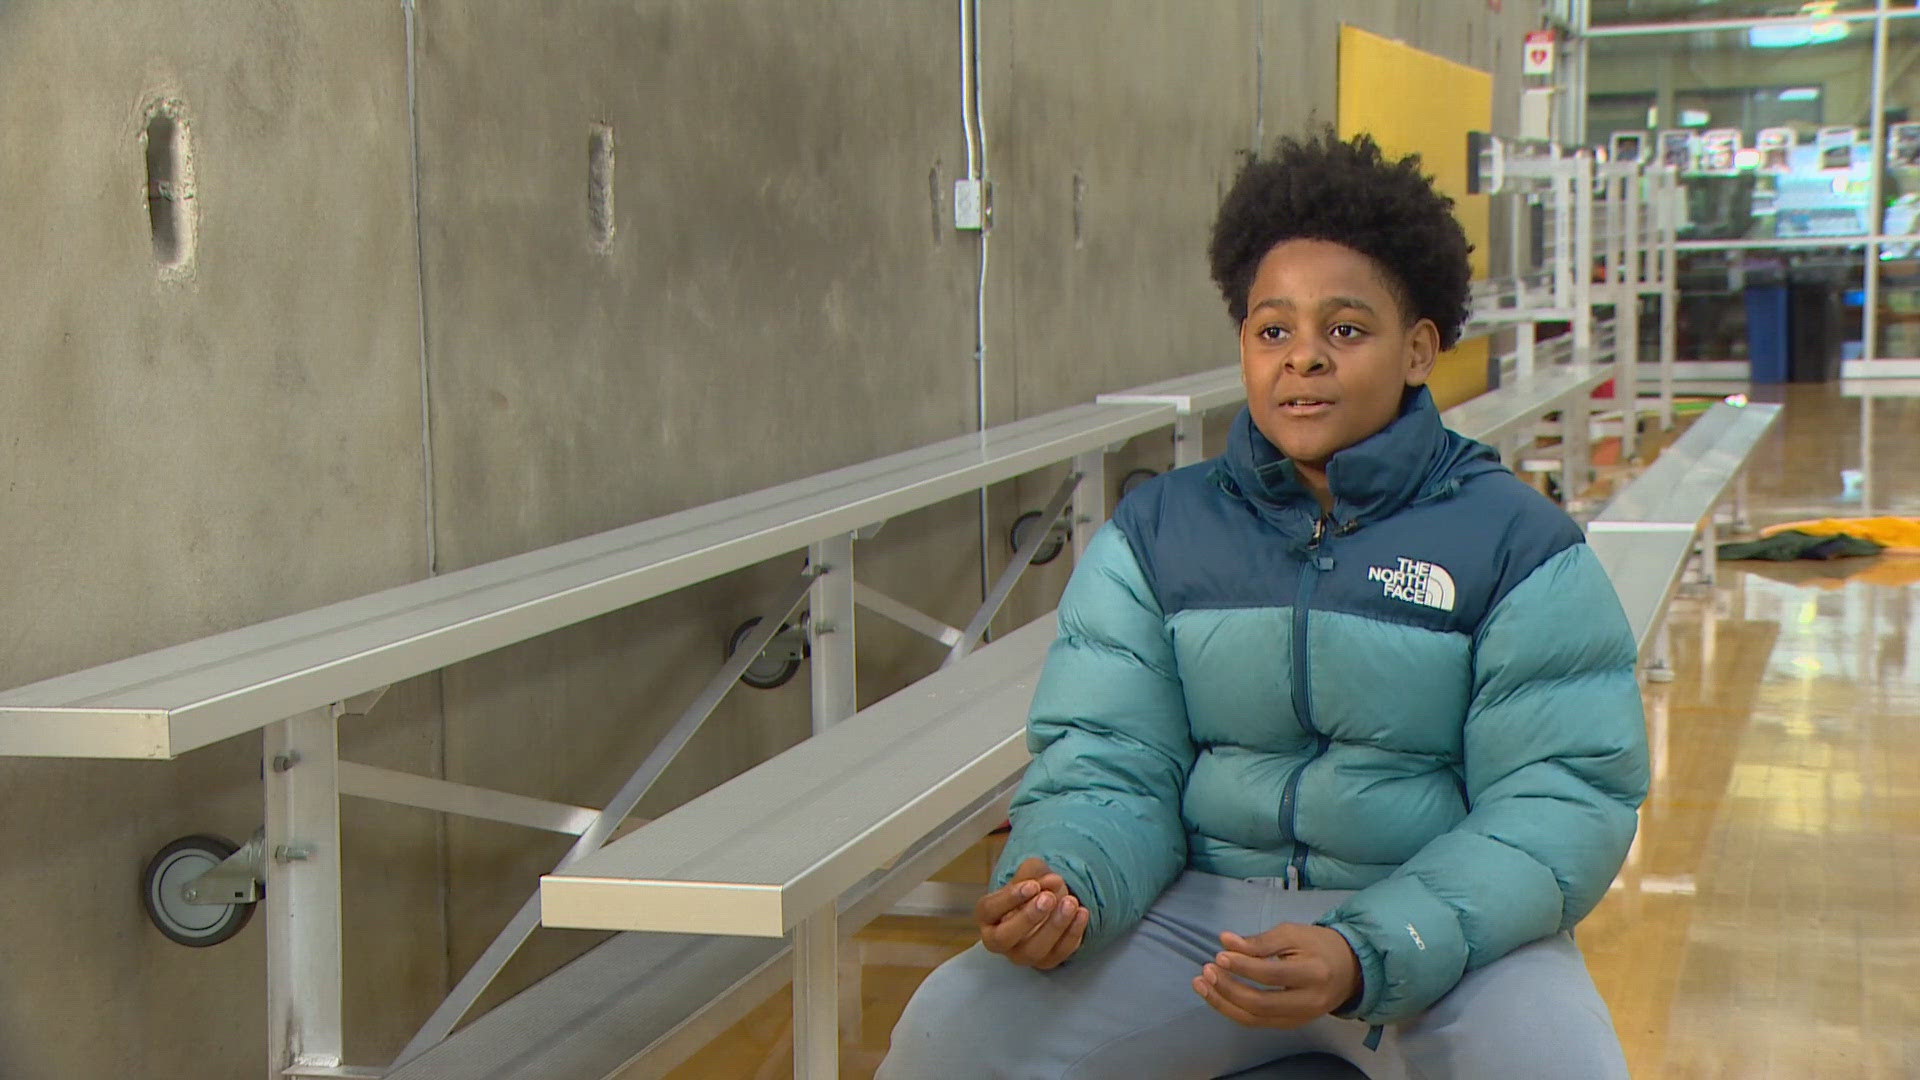 Members of the Boys & Girls Clubs of King County say their experience has helped them navigate life, while their peers get mixed up with trouble.